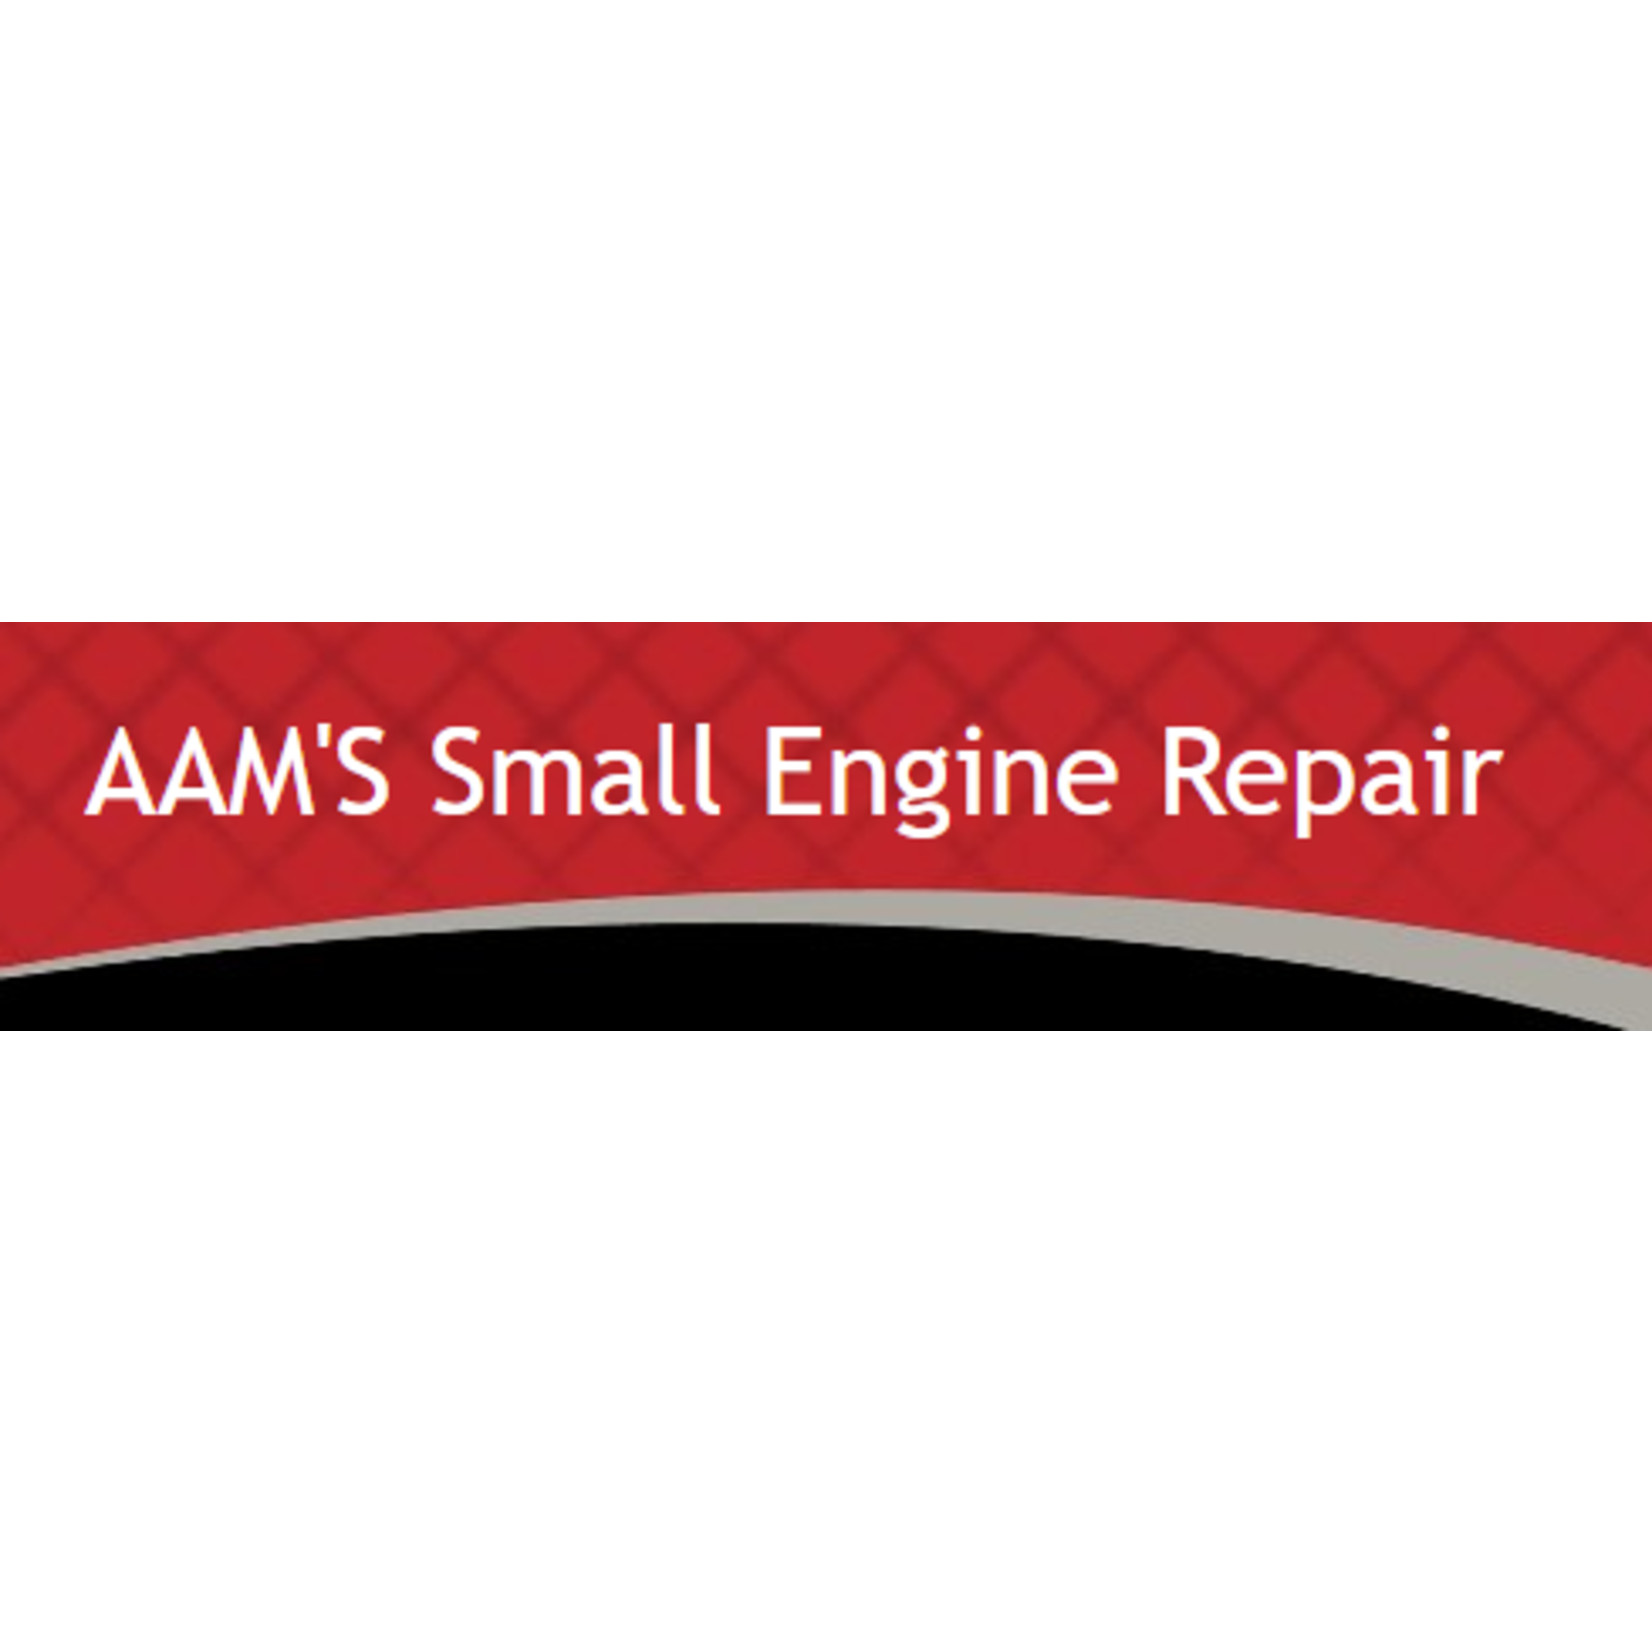 AAM'S Small Engine Repair-Elgin AAM'S Small Engine Repair-Elgin General - repair certificate